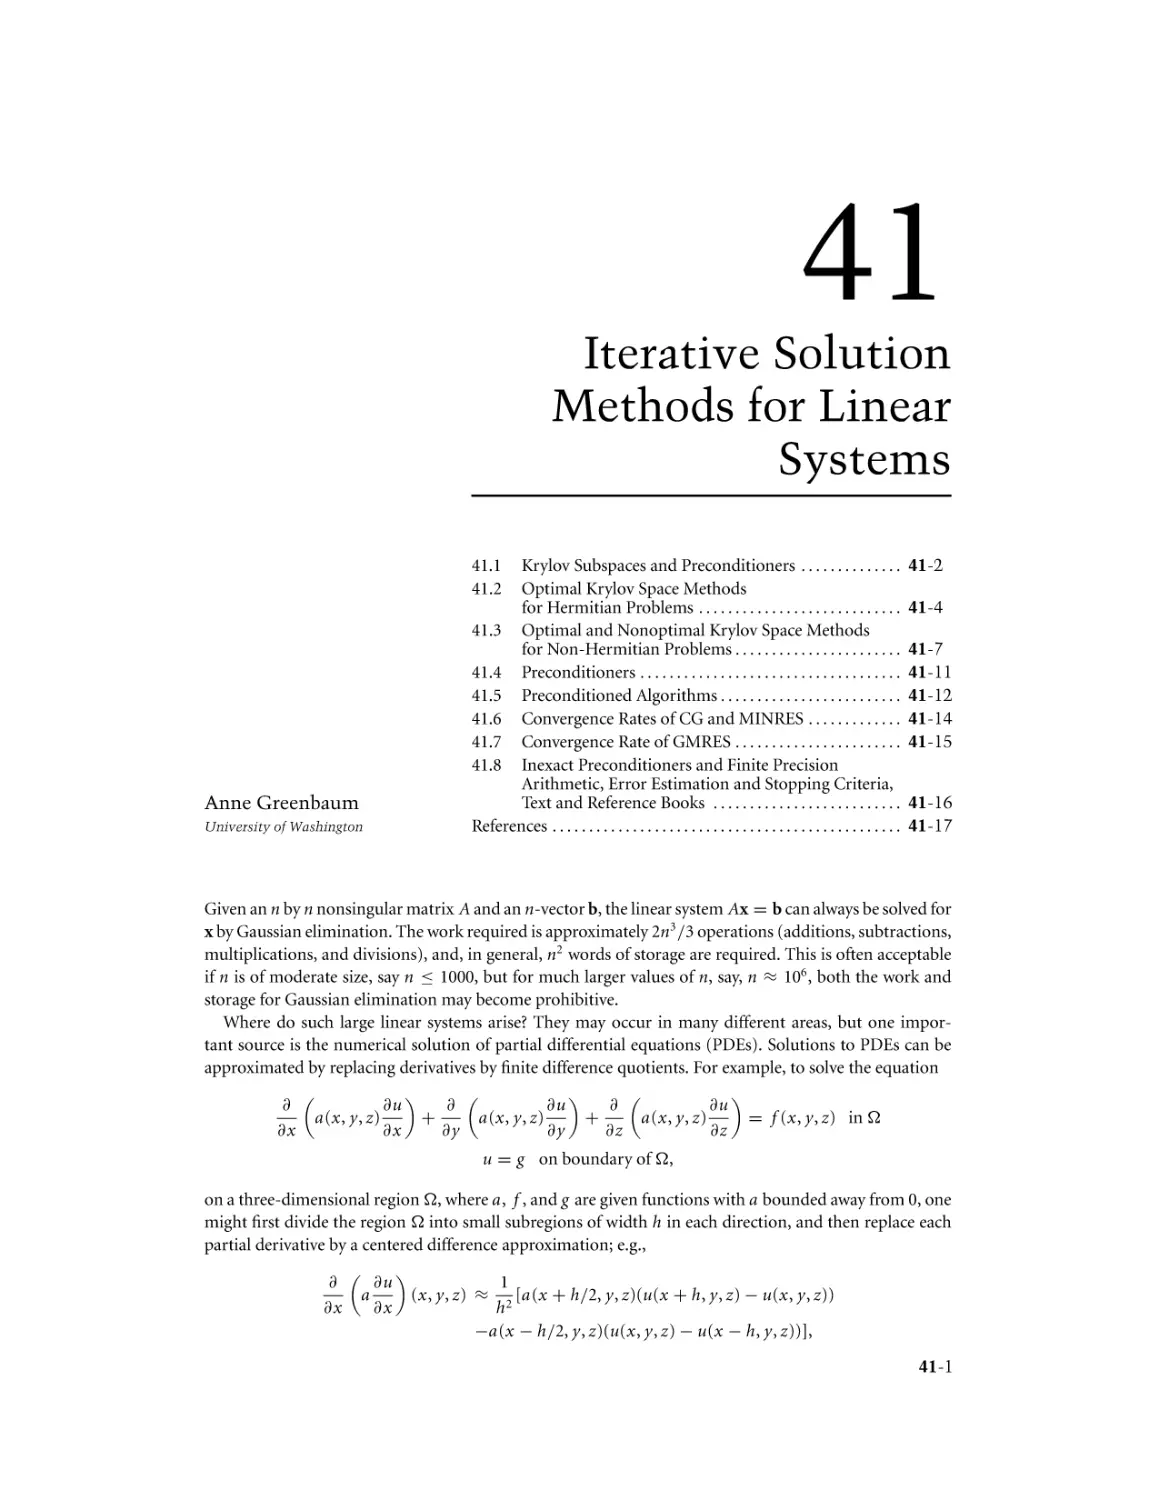 Chapter 41. Iterative Solution Methods for Linear Systems